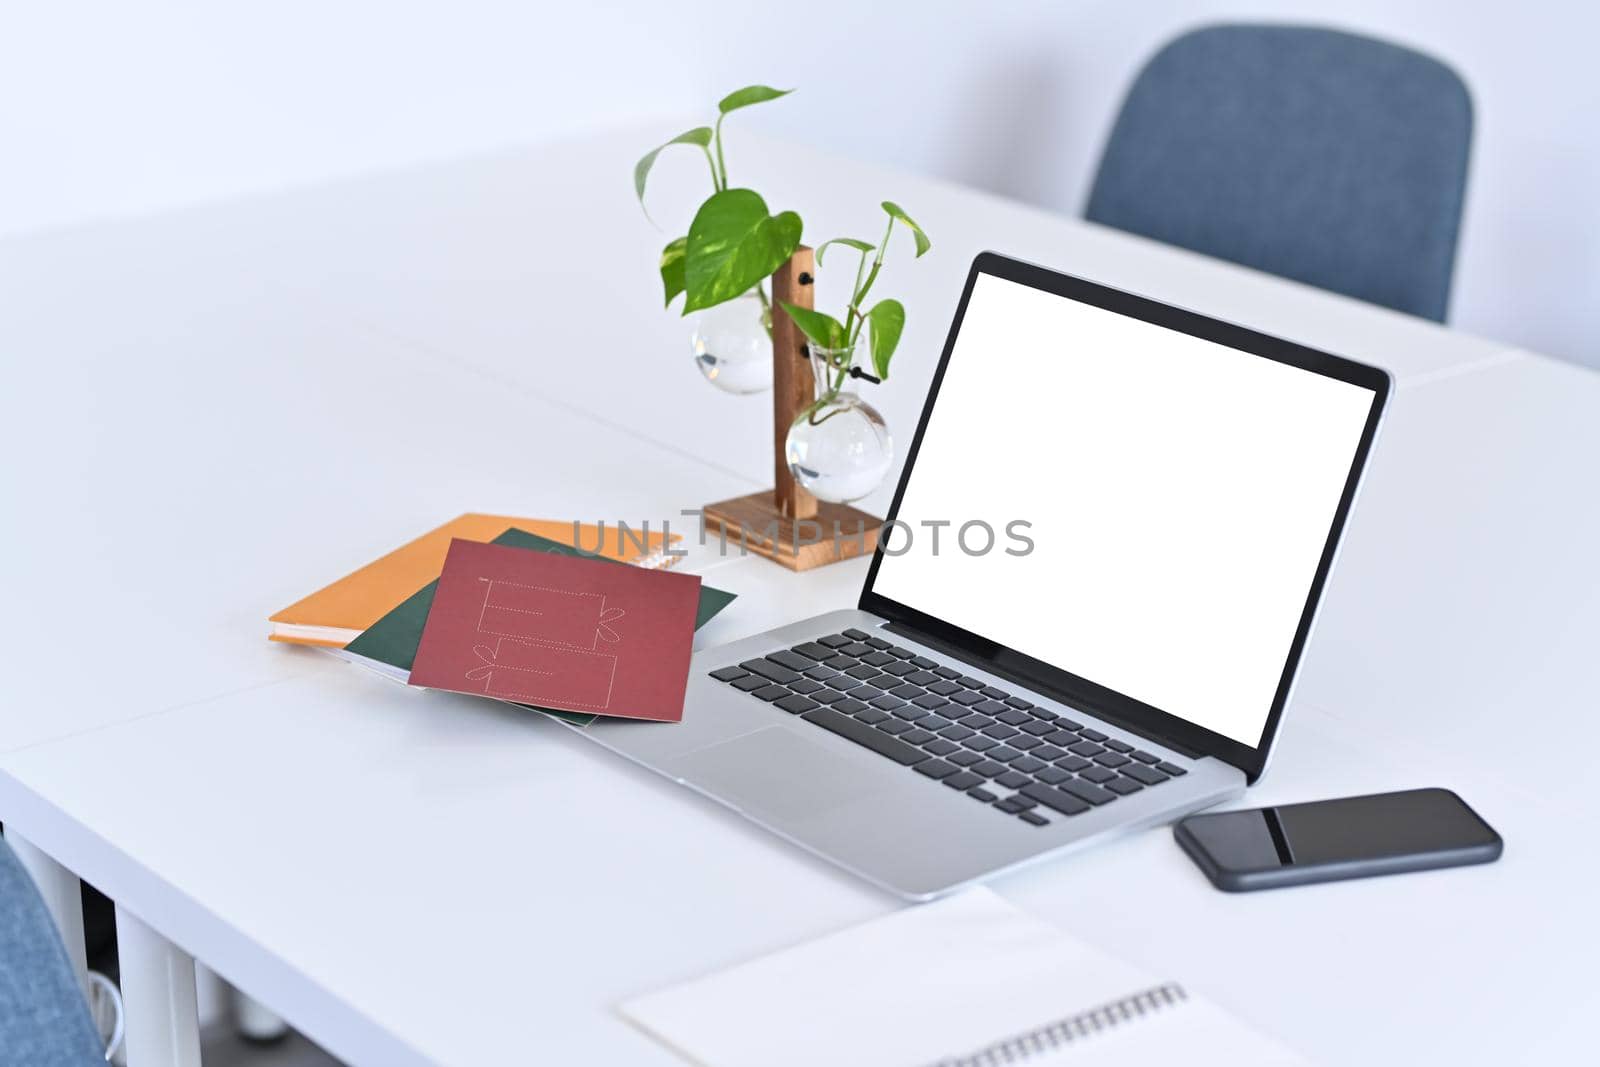 Computer laptop with empty display, smart phone, books and houseplant on white table.